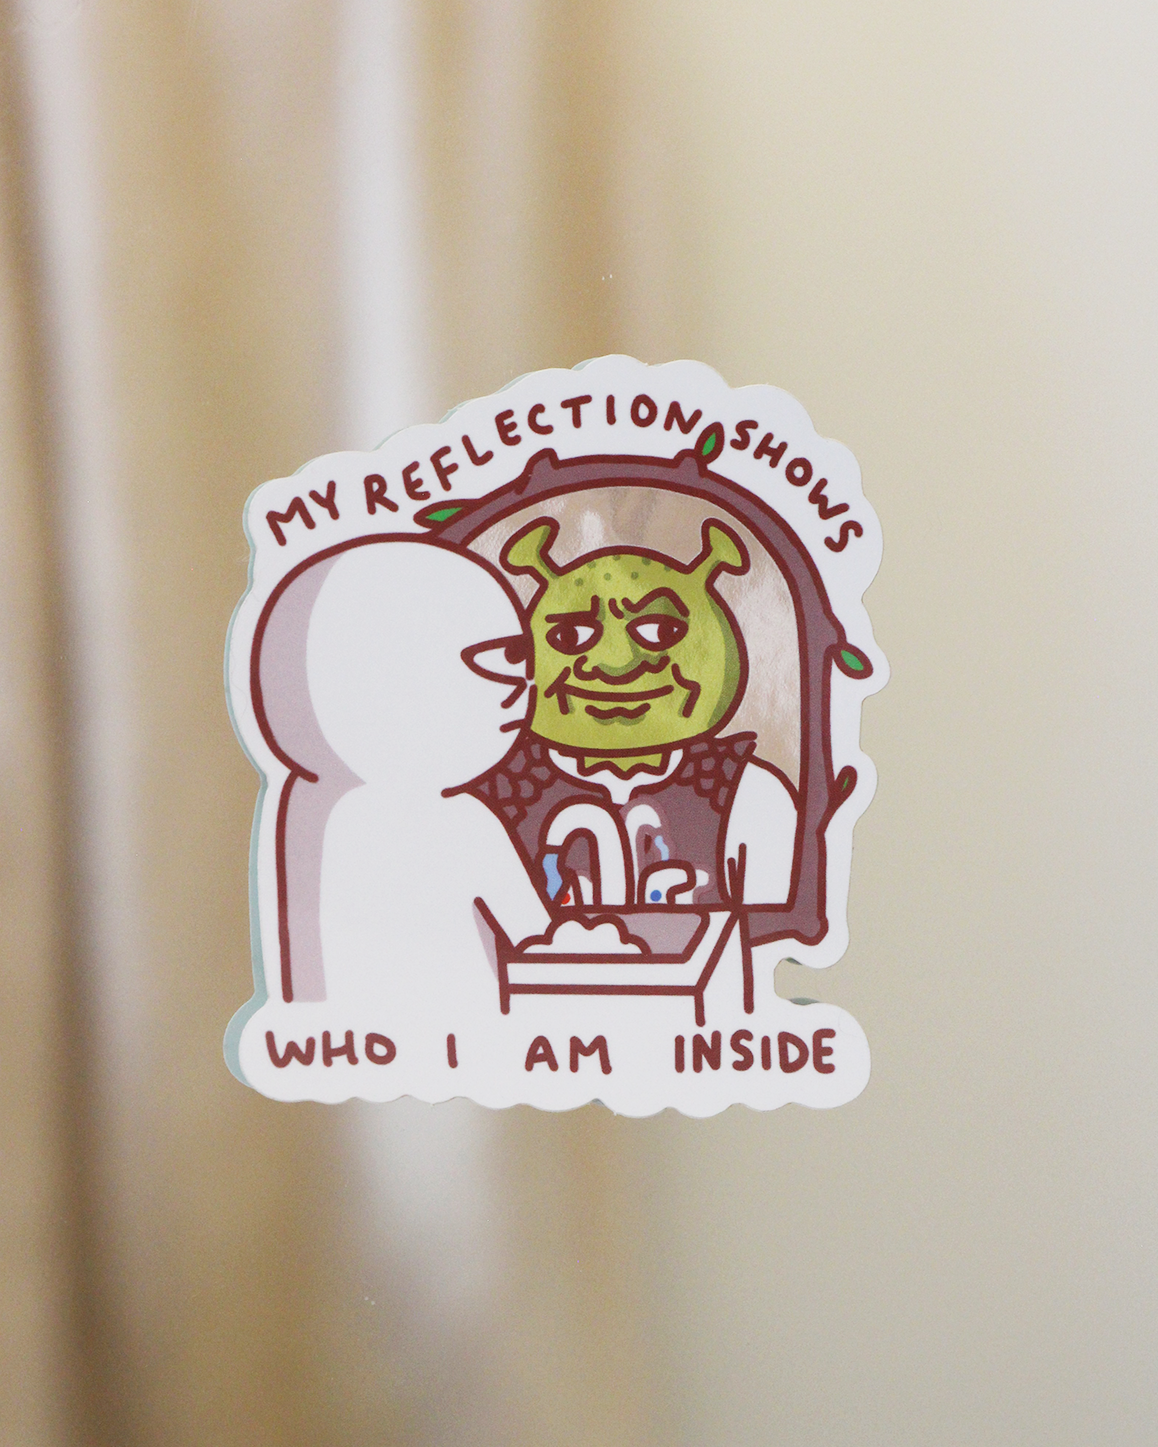 'my reflection' mirror stickers